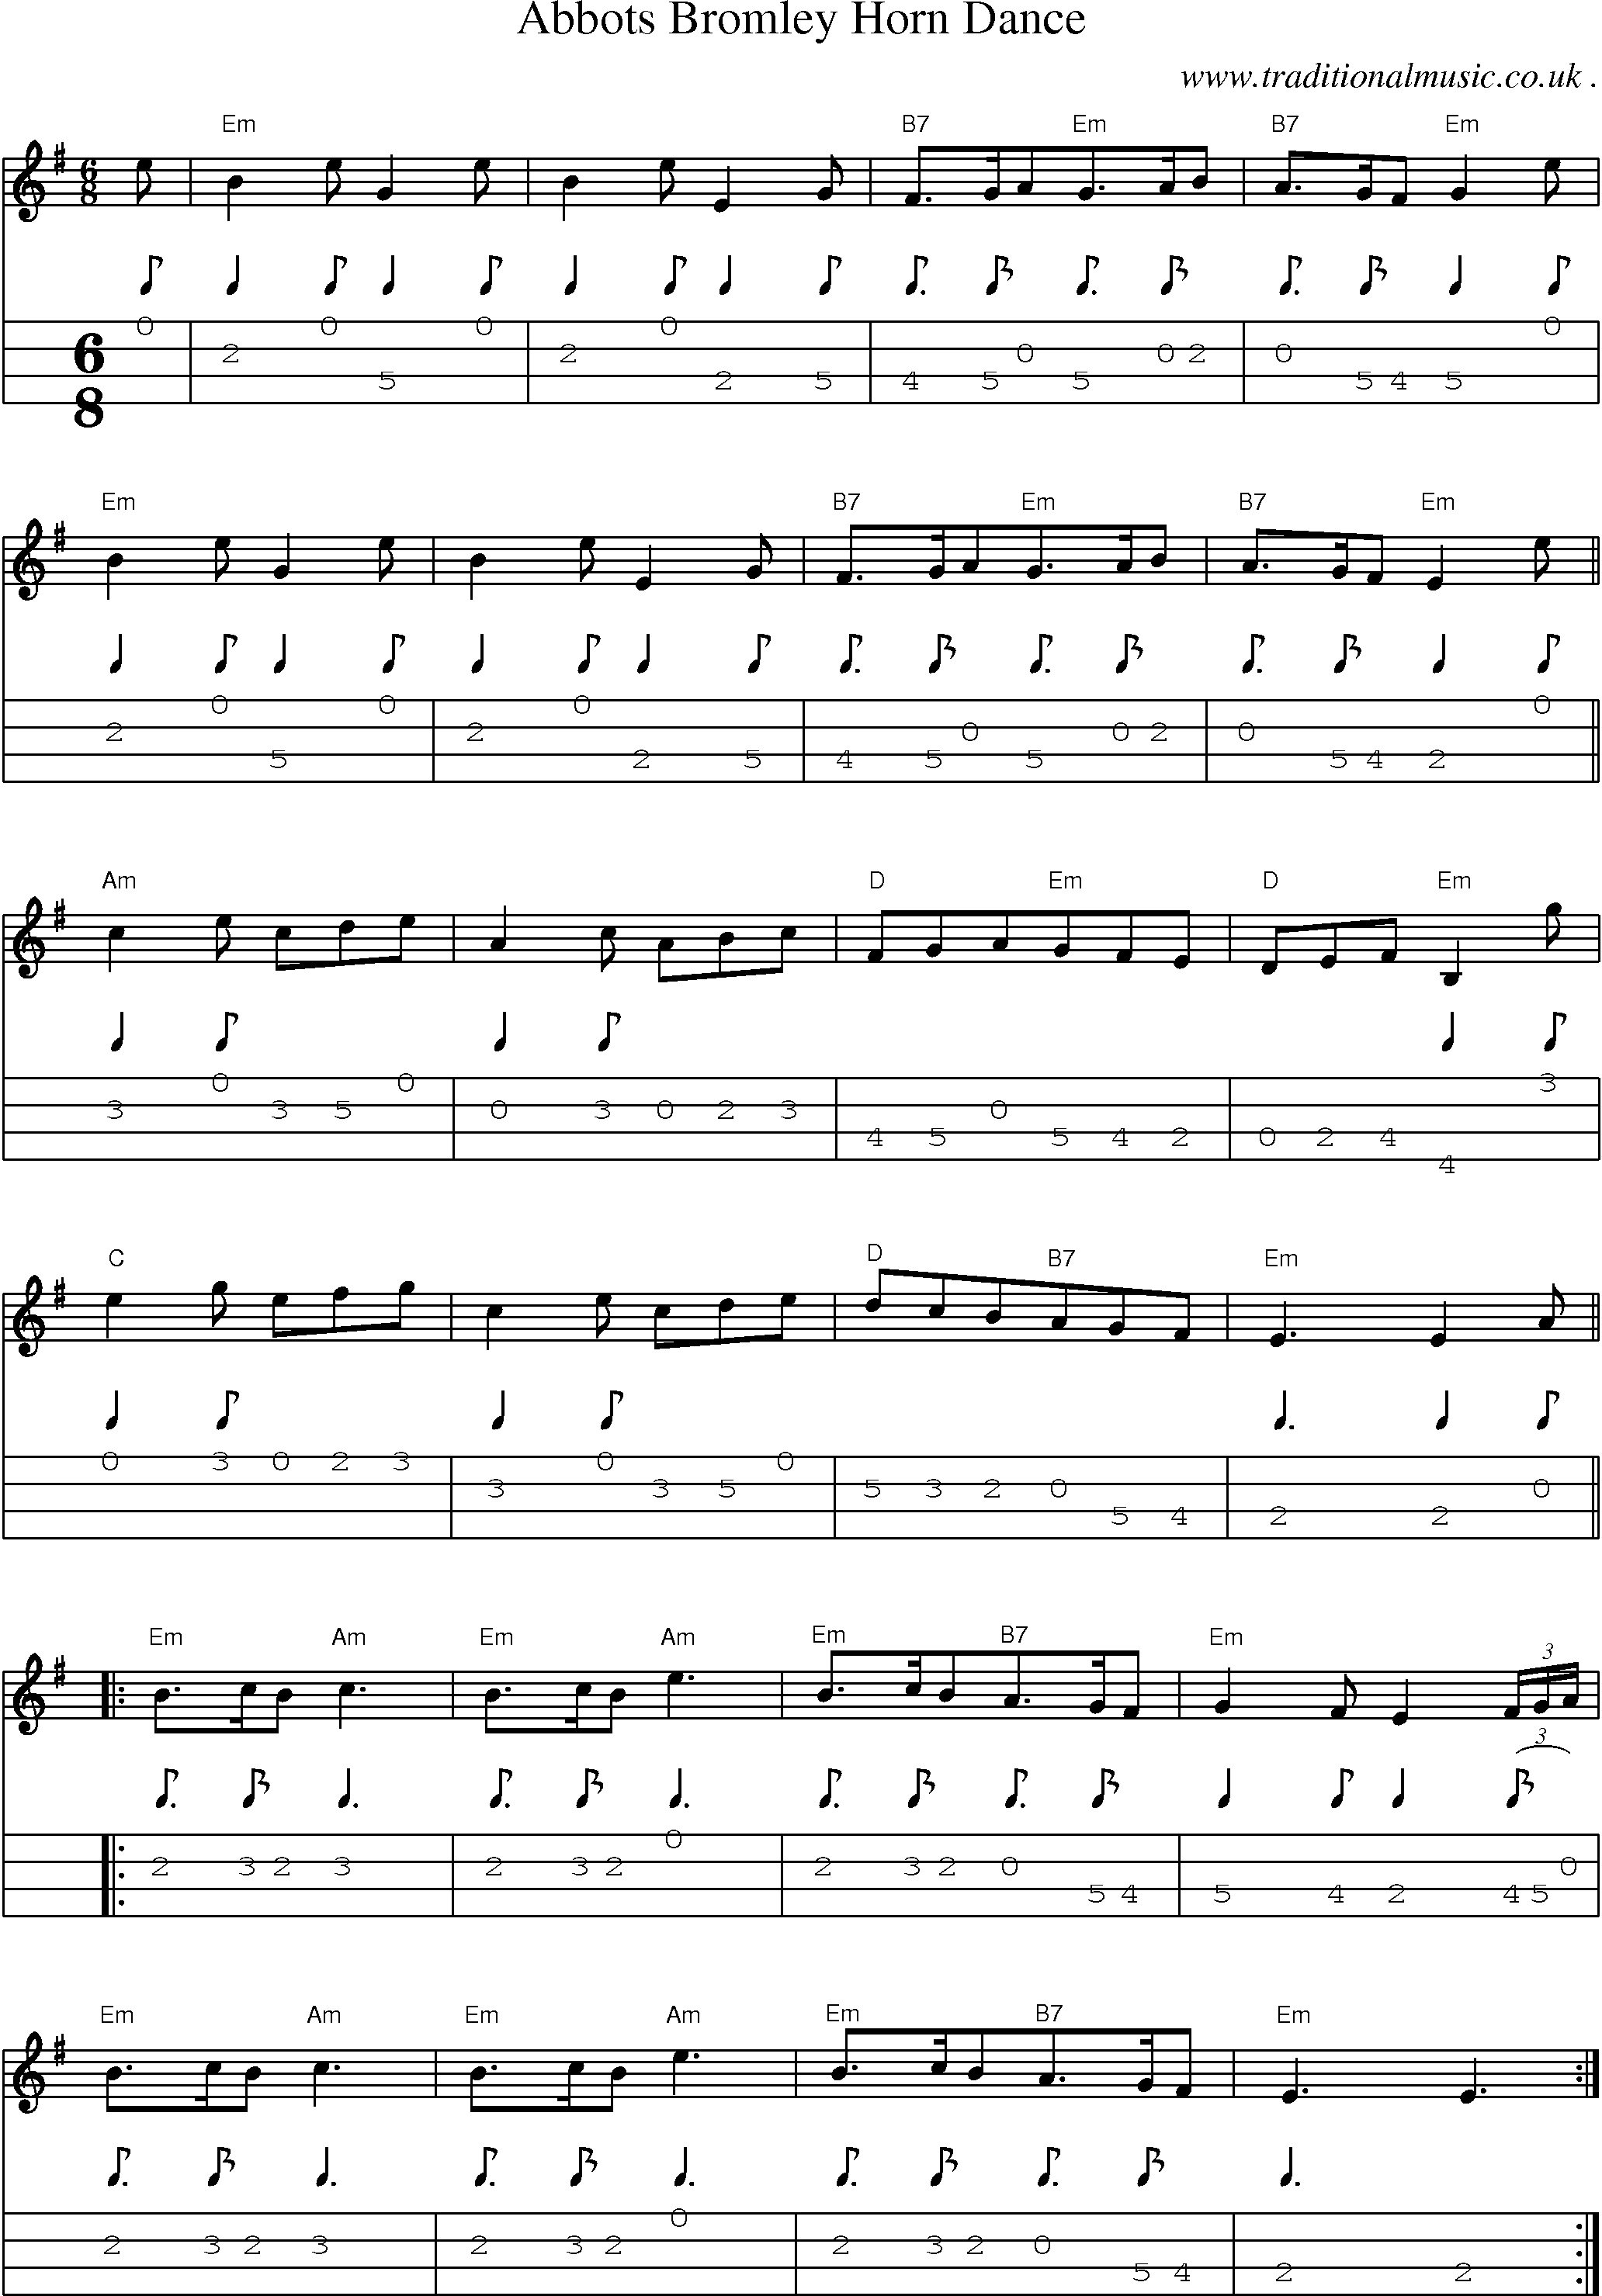 Sheet-Music and Mandolin Tabs for Abbots Bromley Horn Dance